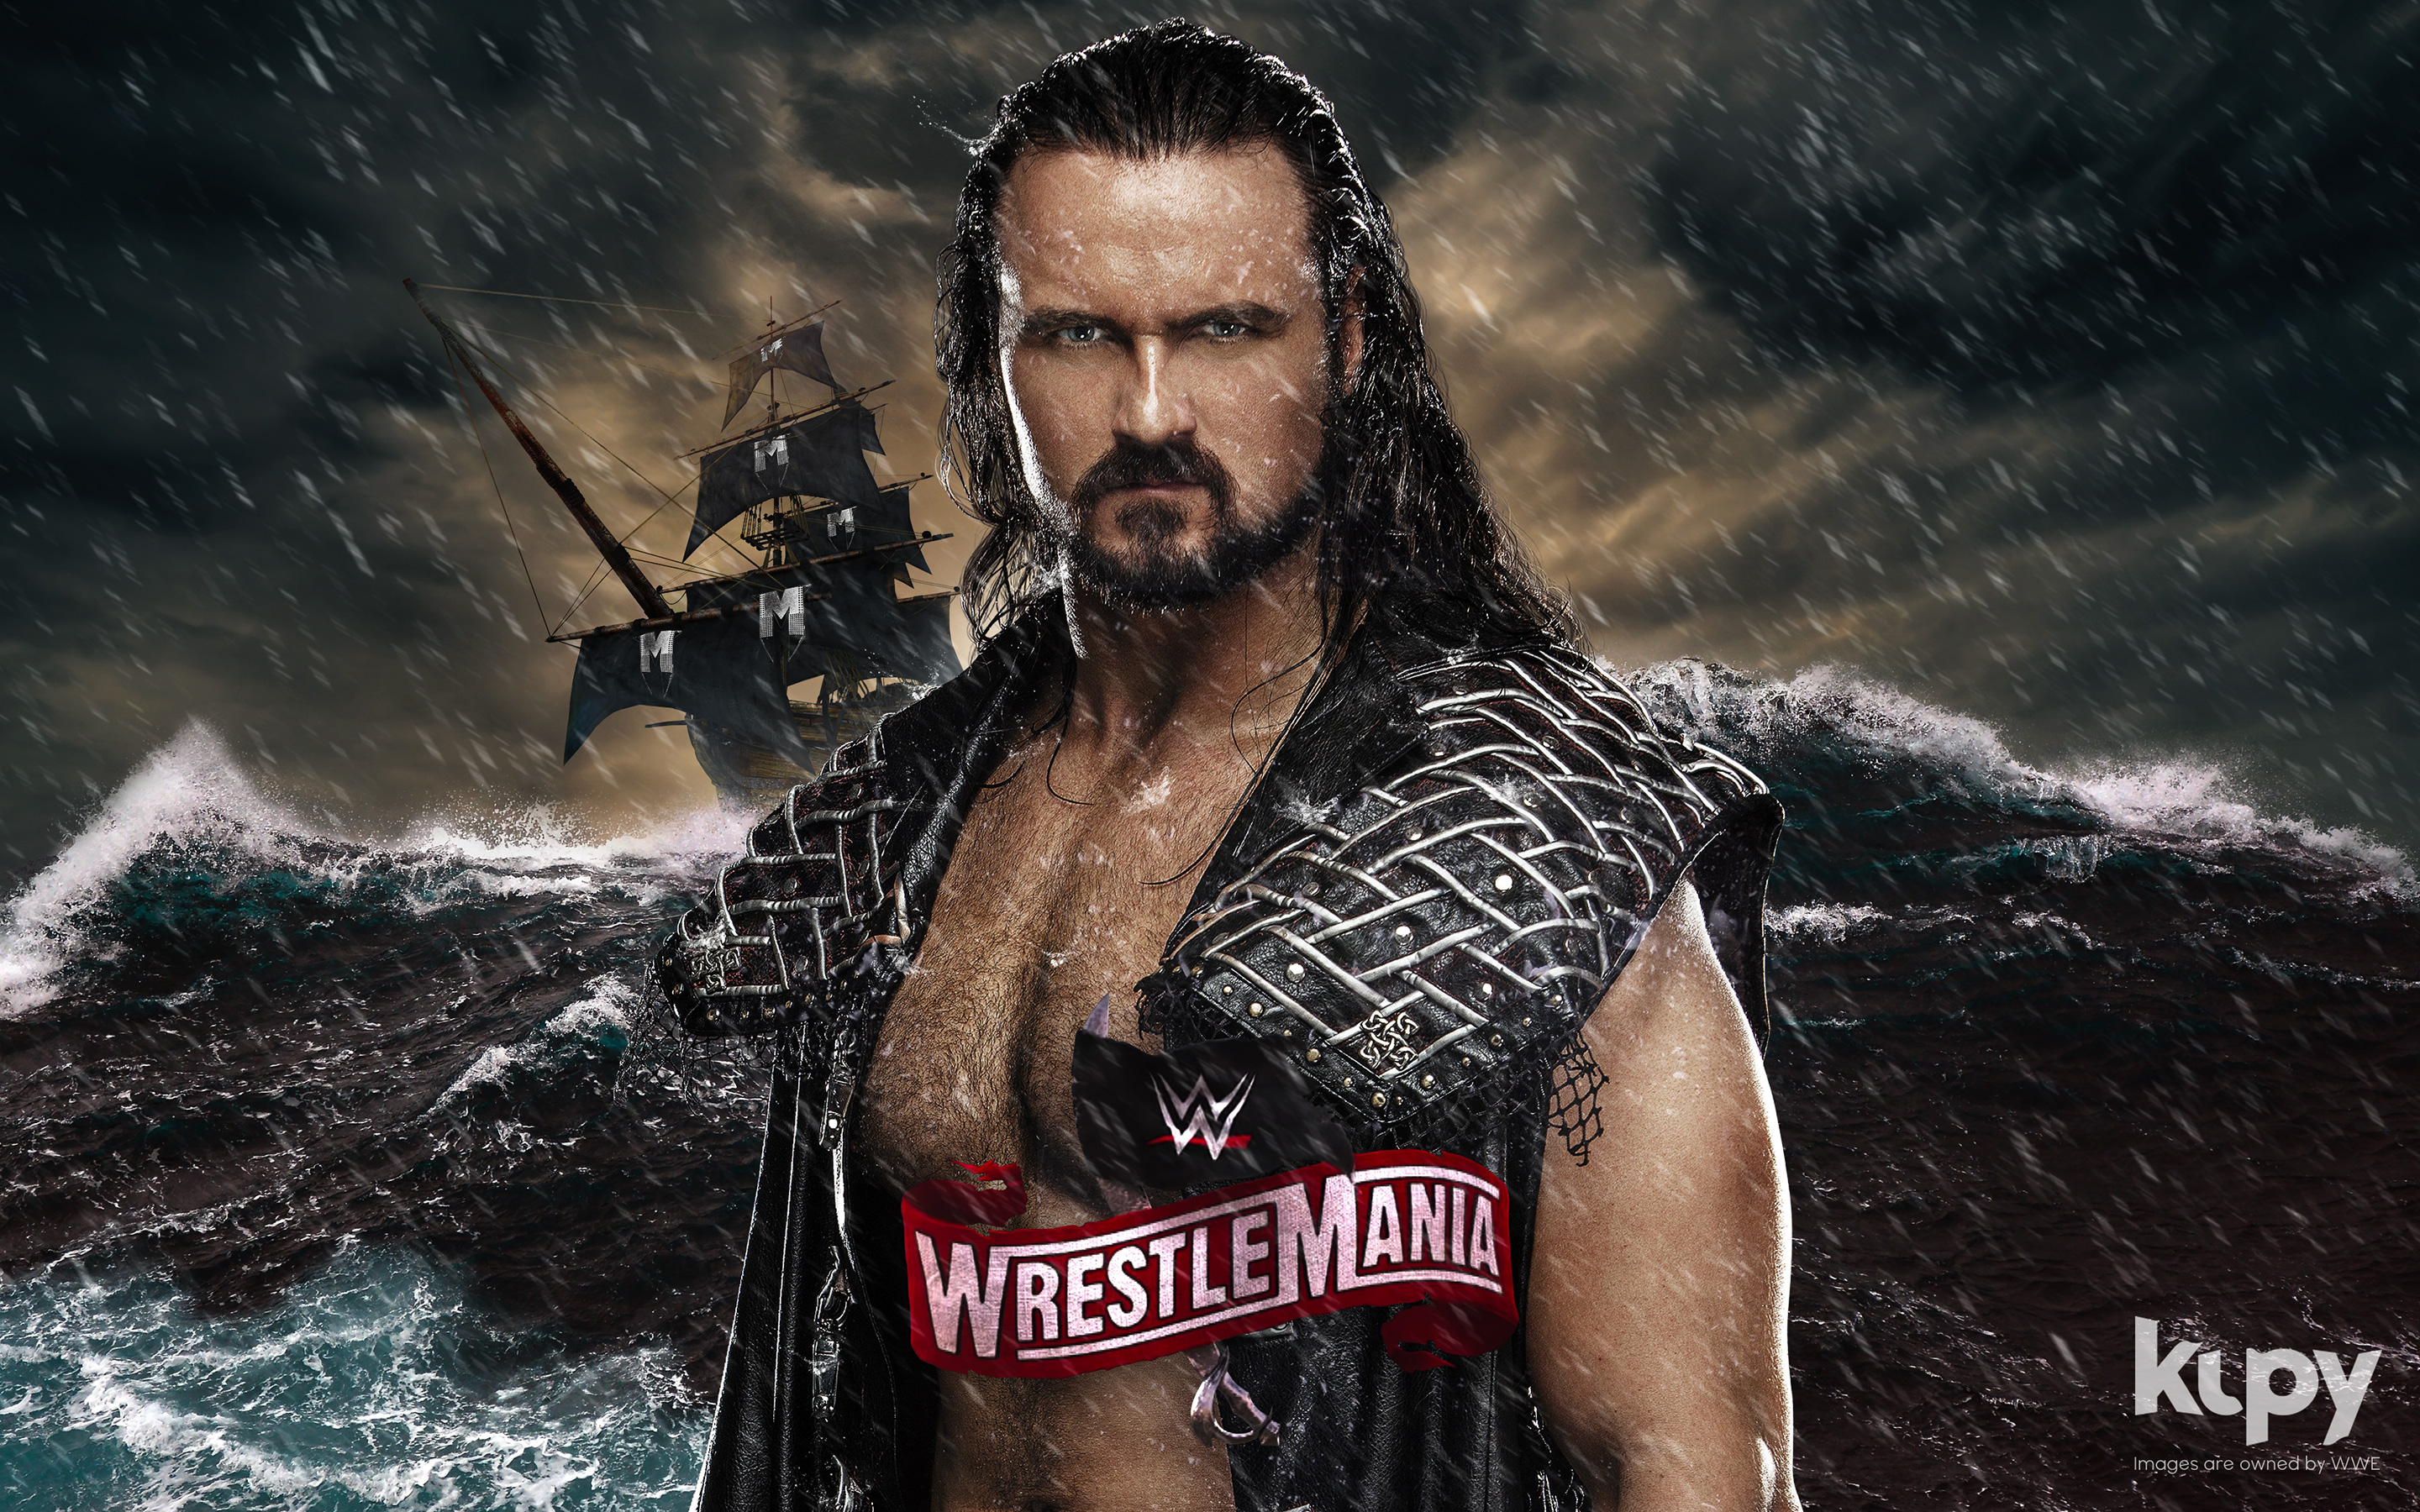 Kupy Wrestling Wallpapers The Latest Source For Your Wwe Wrestling Wallpaper Needs Mobile Hd And 4k Resolutions Available Blog Archive Road To Wrestlemania 36 Royal Rumble Winner Drew Mcintyre Wallpaper